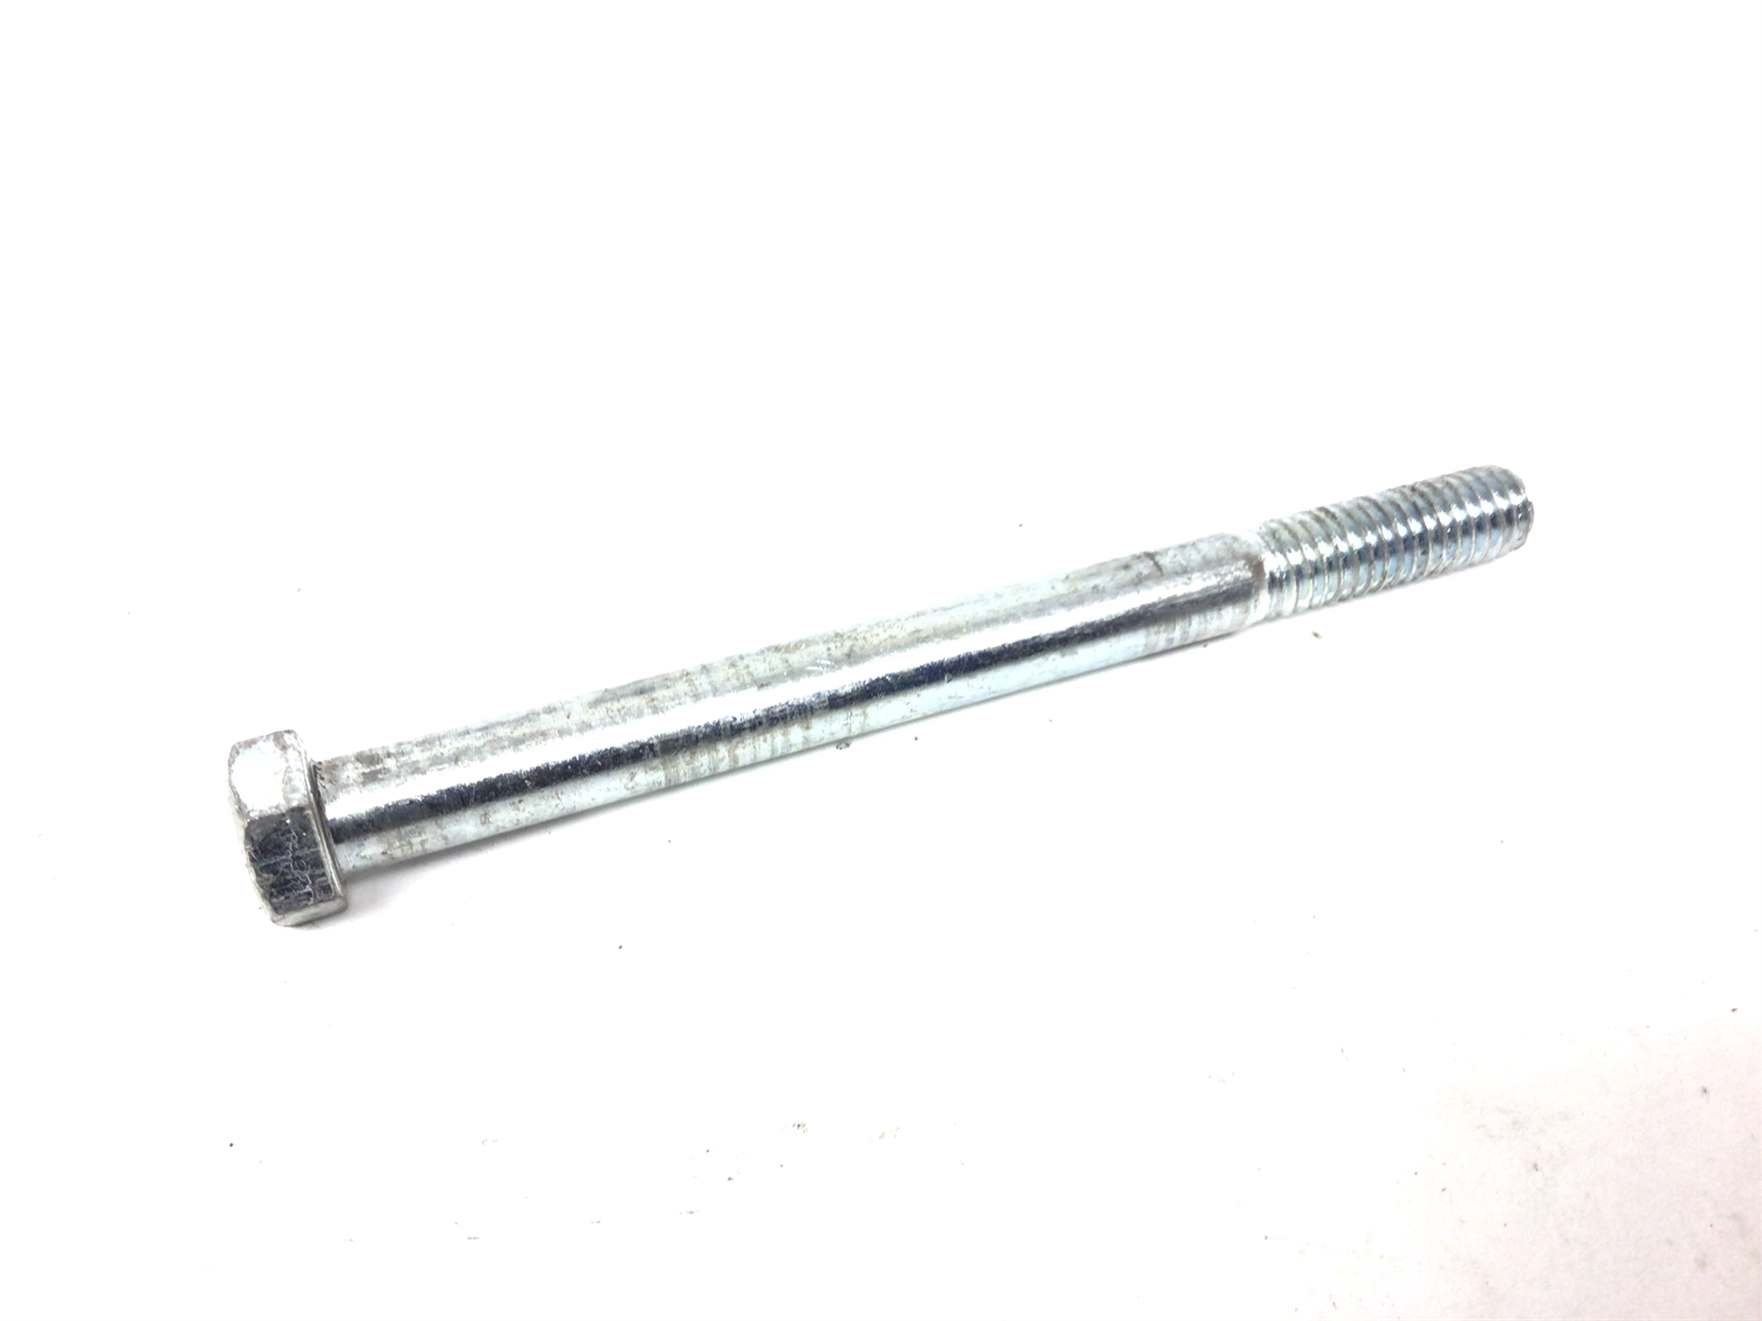 Hex Bolt 3/8 -16 x 4.50 Inch (Used)